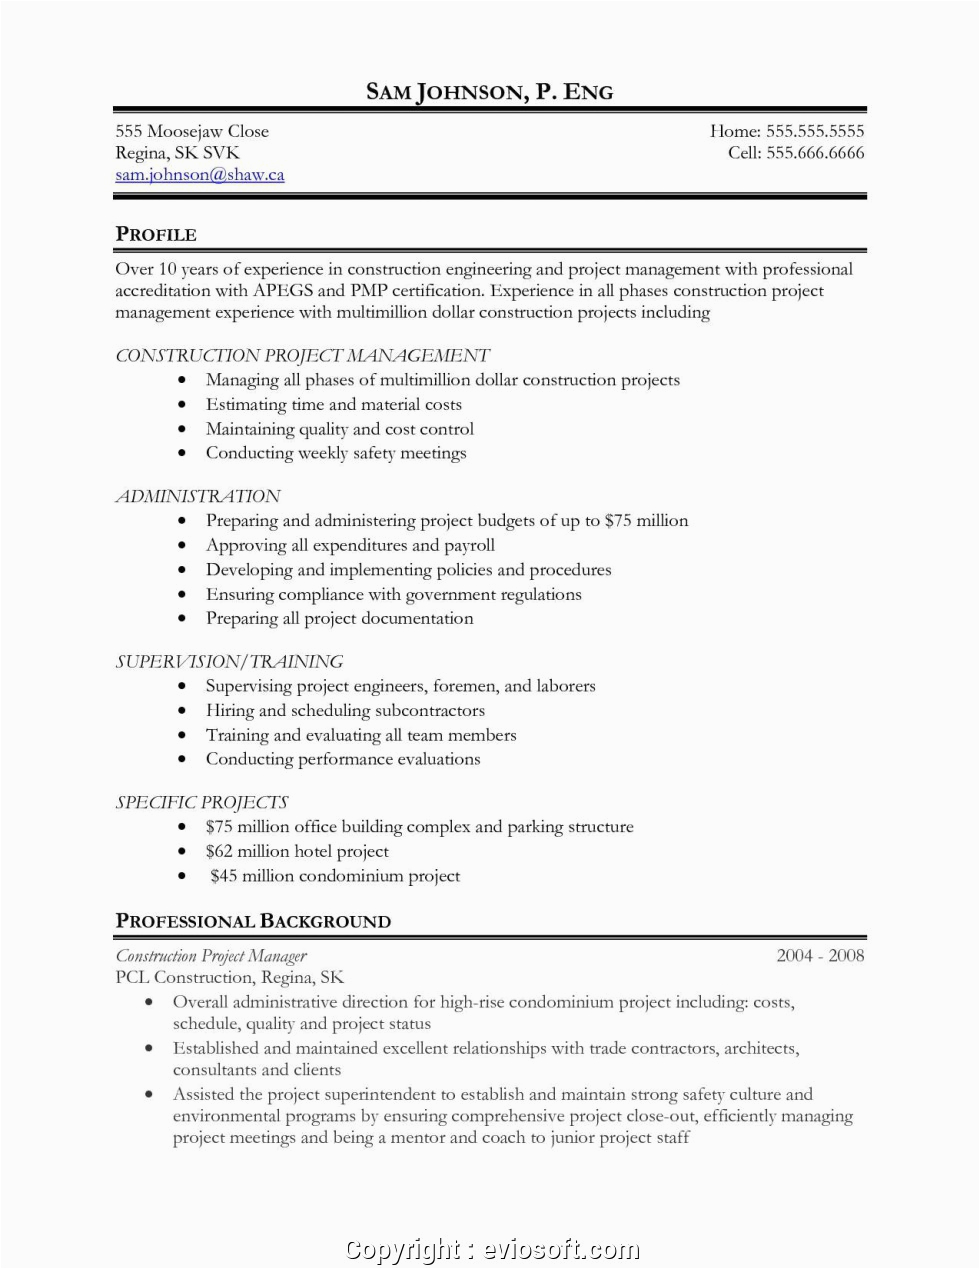 Construction Project Manager Resume Sample Doc Simply Construction Project Manager Resume Sample Doc It